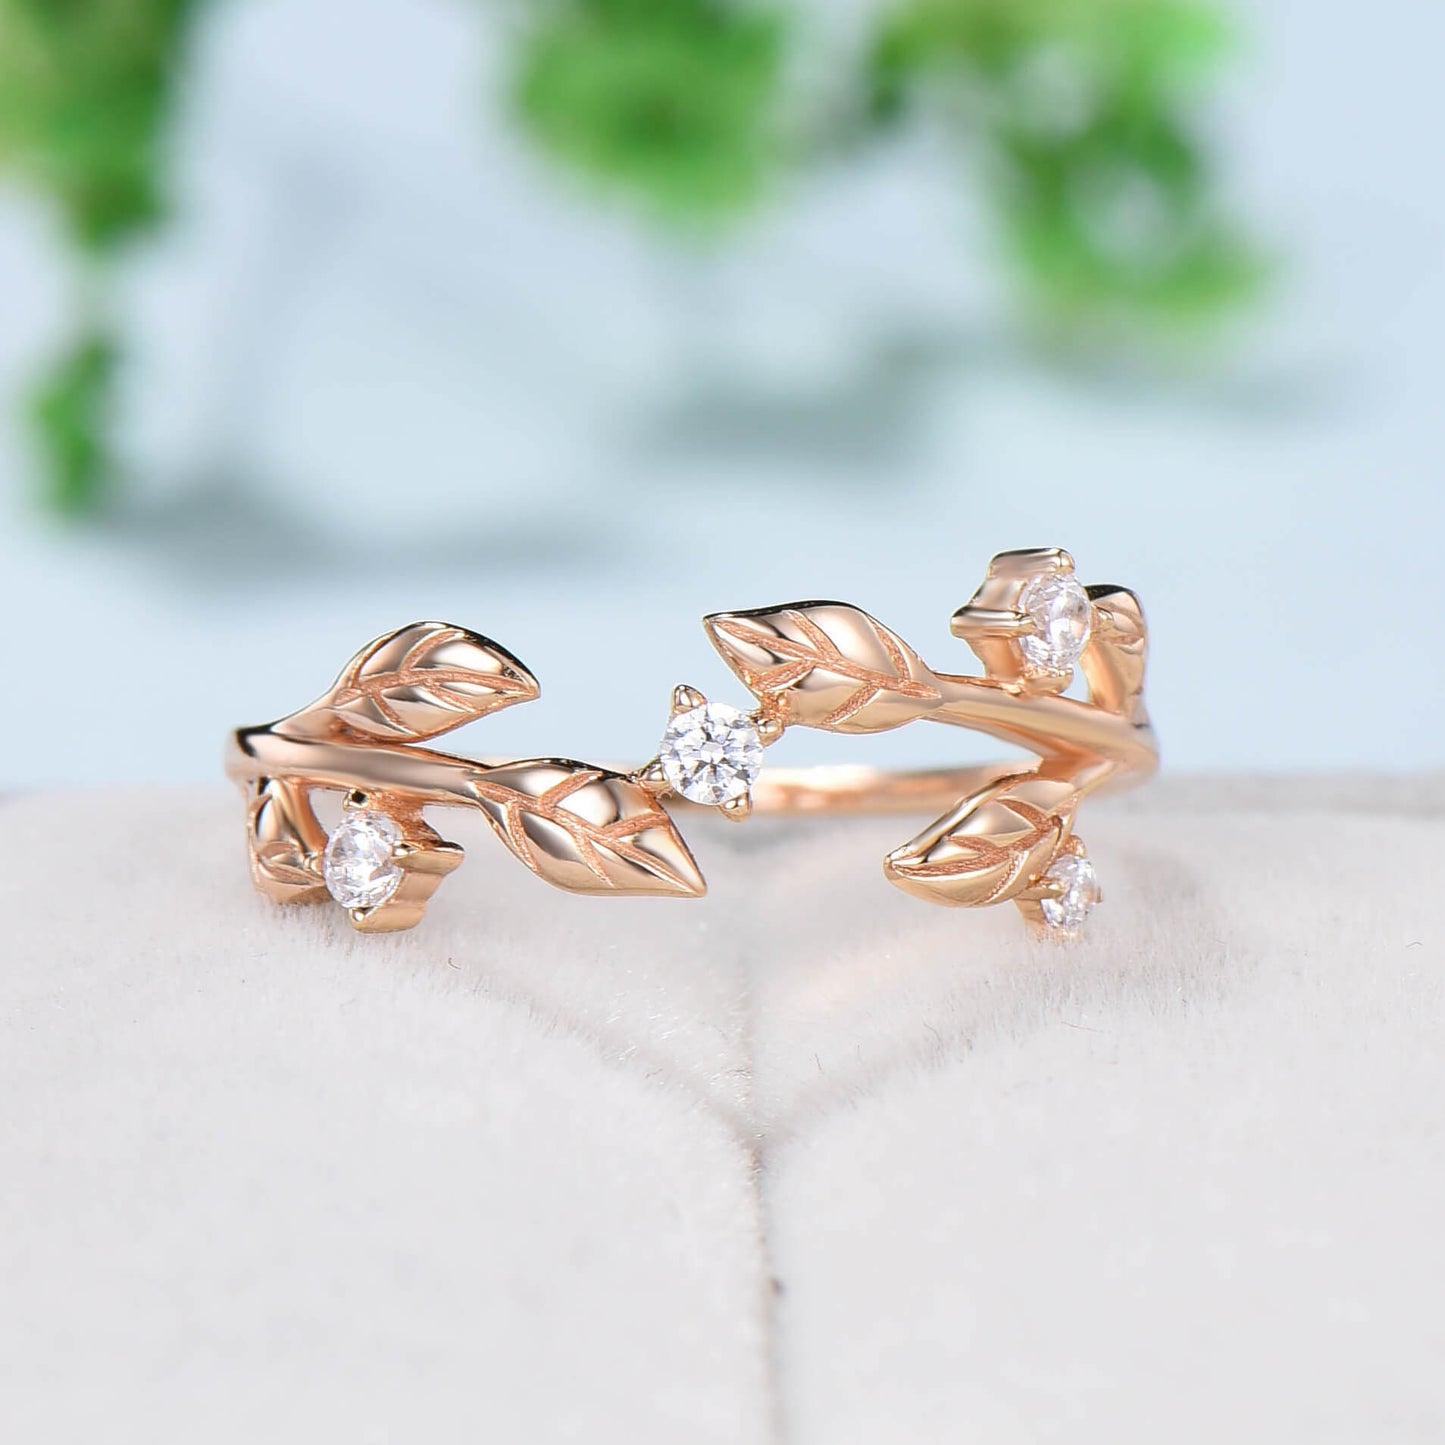 Nature inspired wedding band vintage moissanite diamond wedding band gold twisted leaf matching band for women stacking anniversary gift - PENFINE